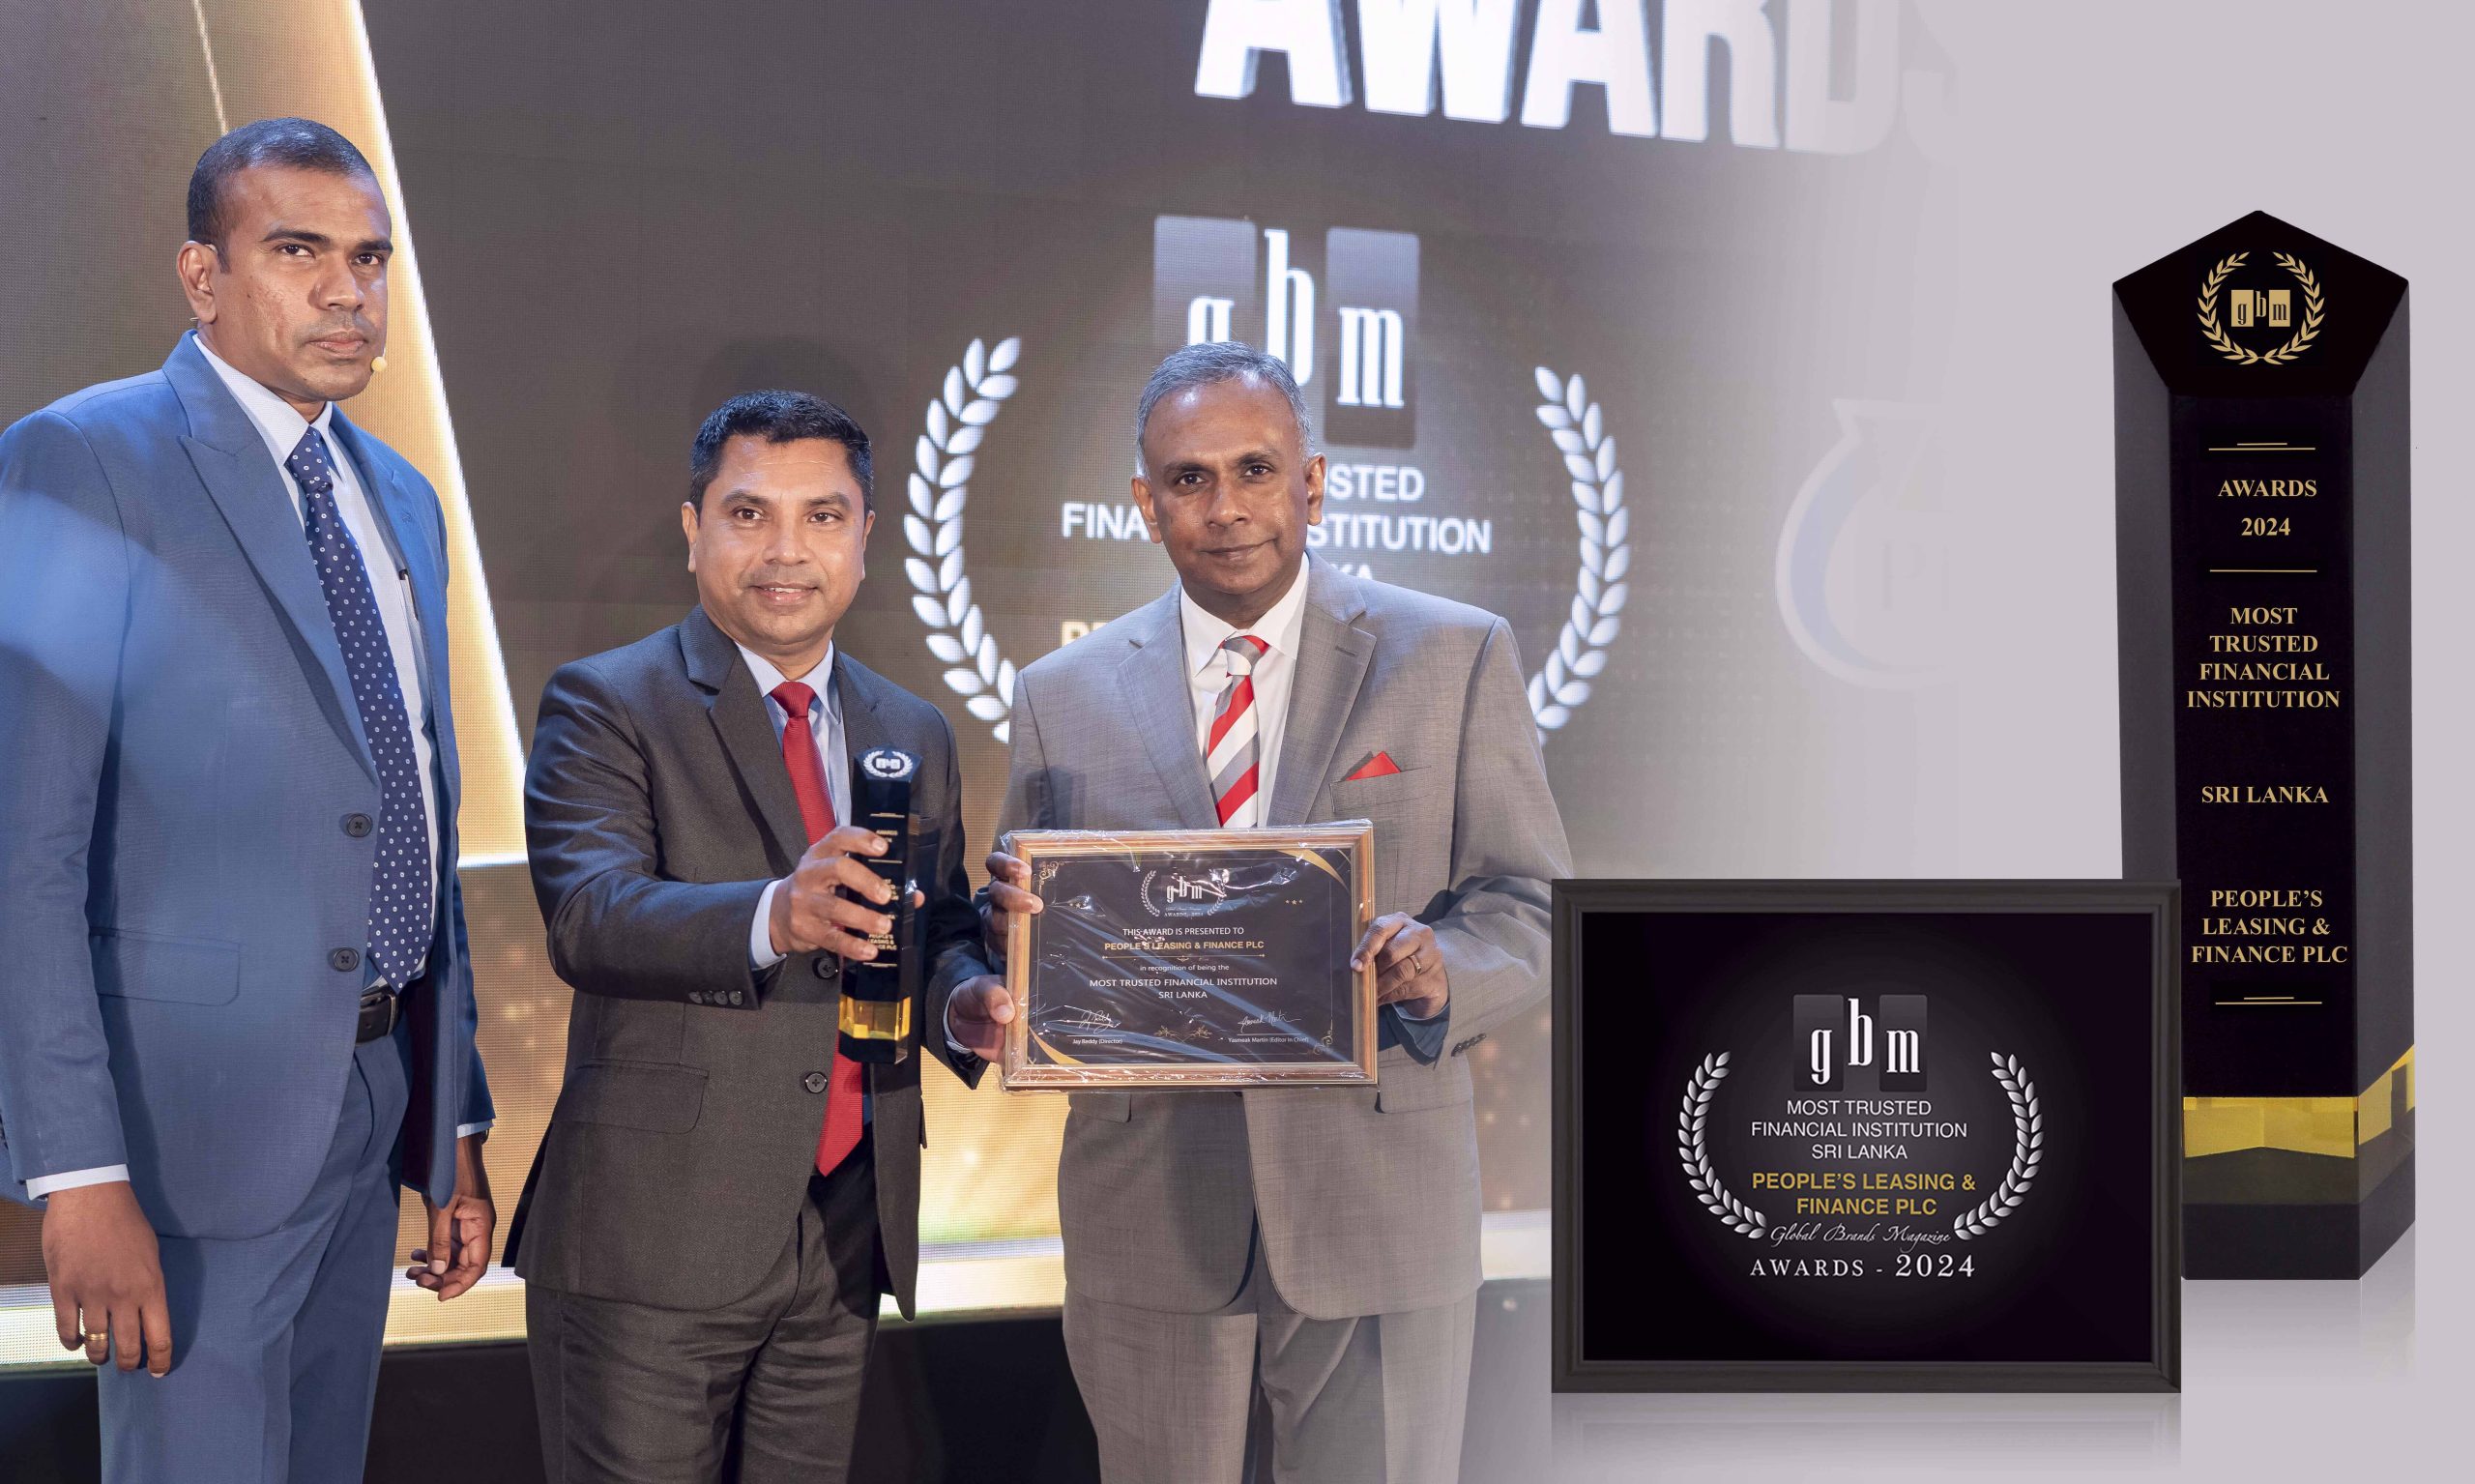 People’s Leasing & Finance PLC Crowned Most Trusted Financial Institution in Sri Lanka by Global Brands Magazine